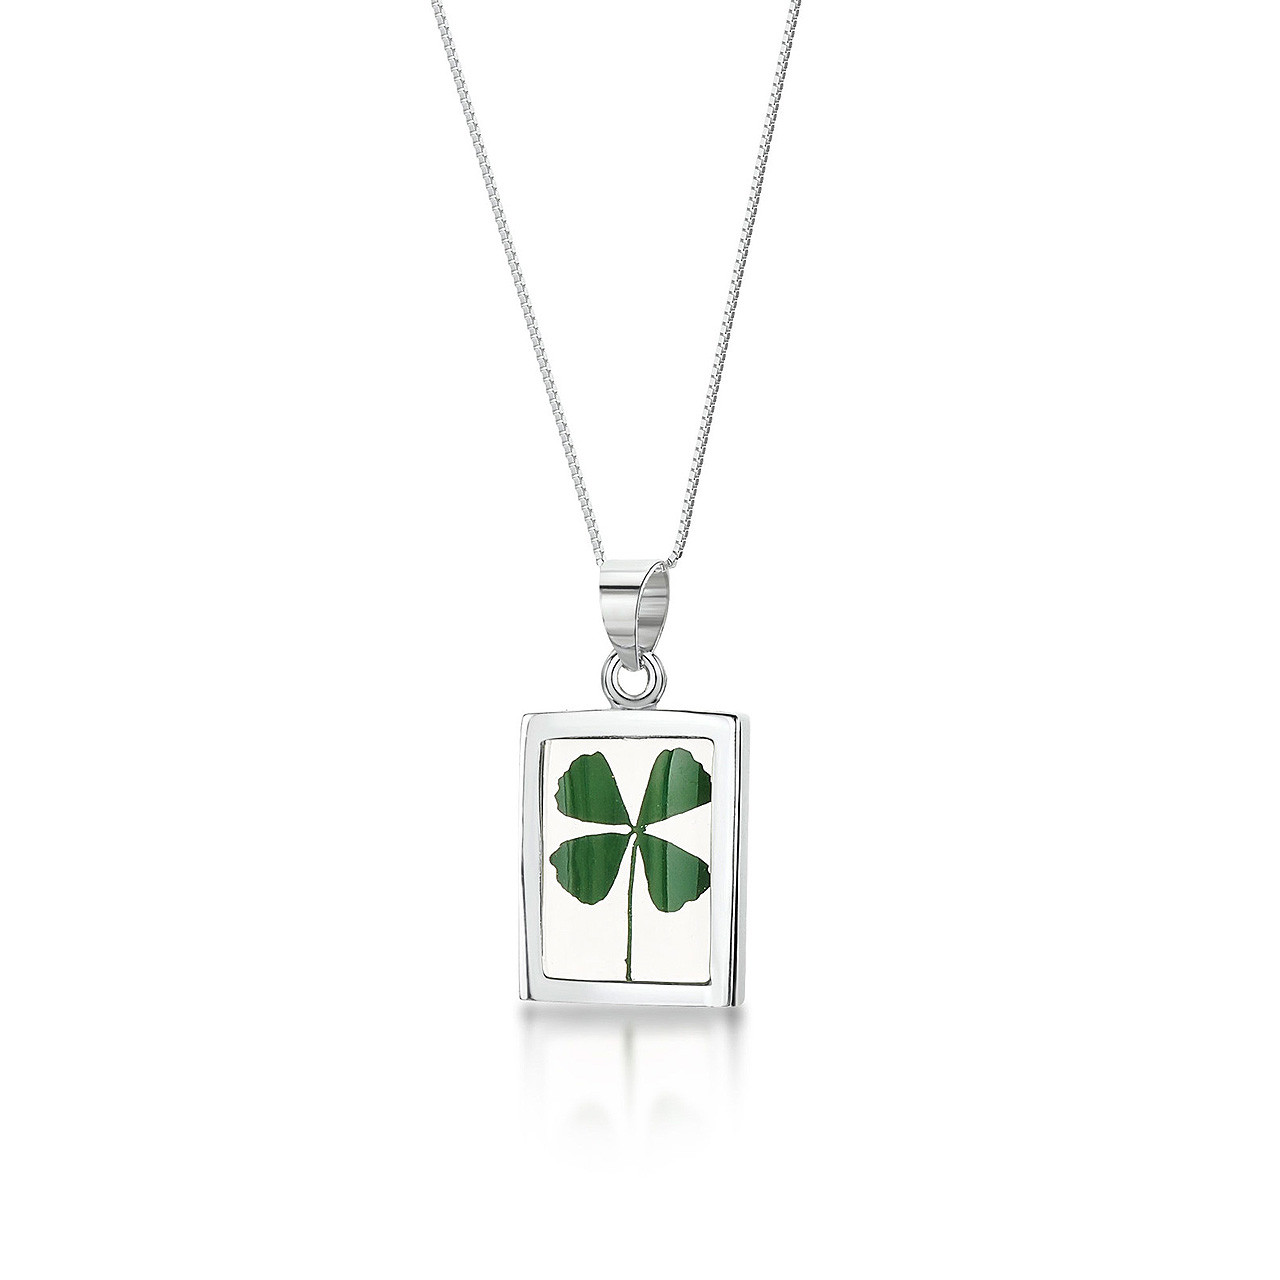 4 Leaf Clover Necklace in Sterling Silver Lucky Charm Dainty – YanYa